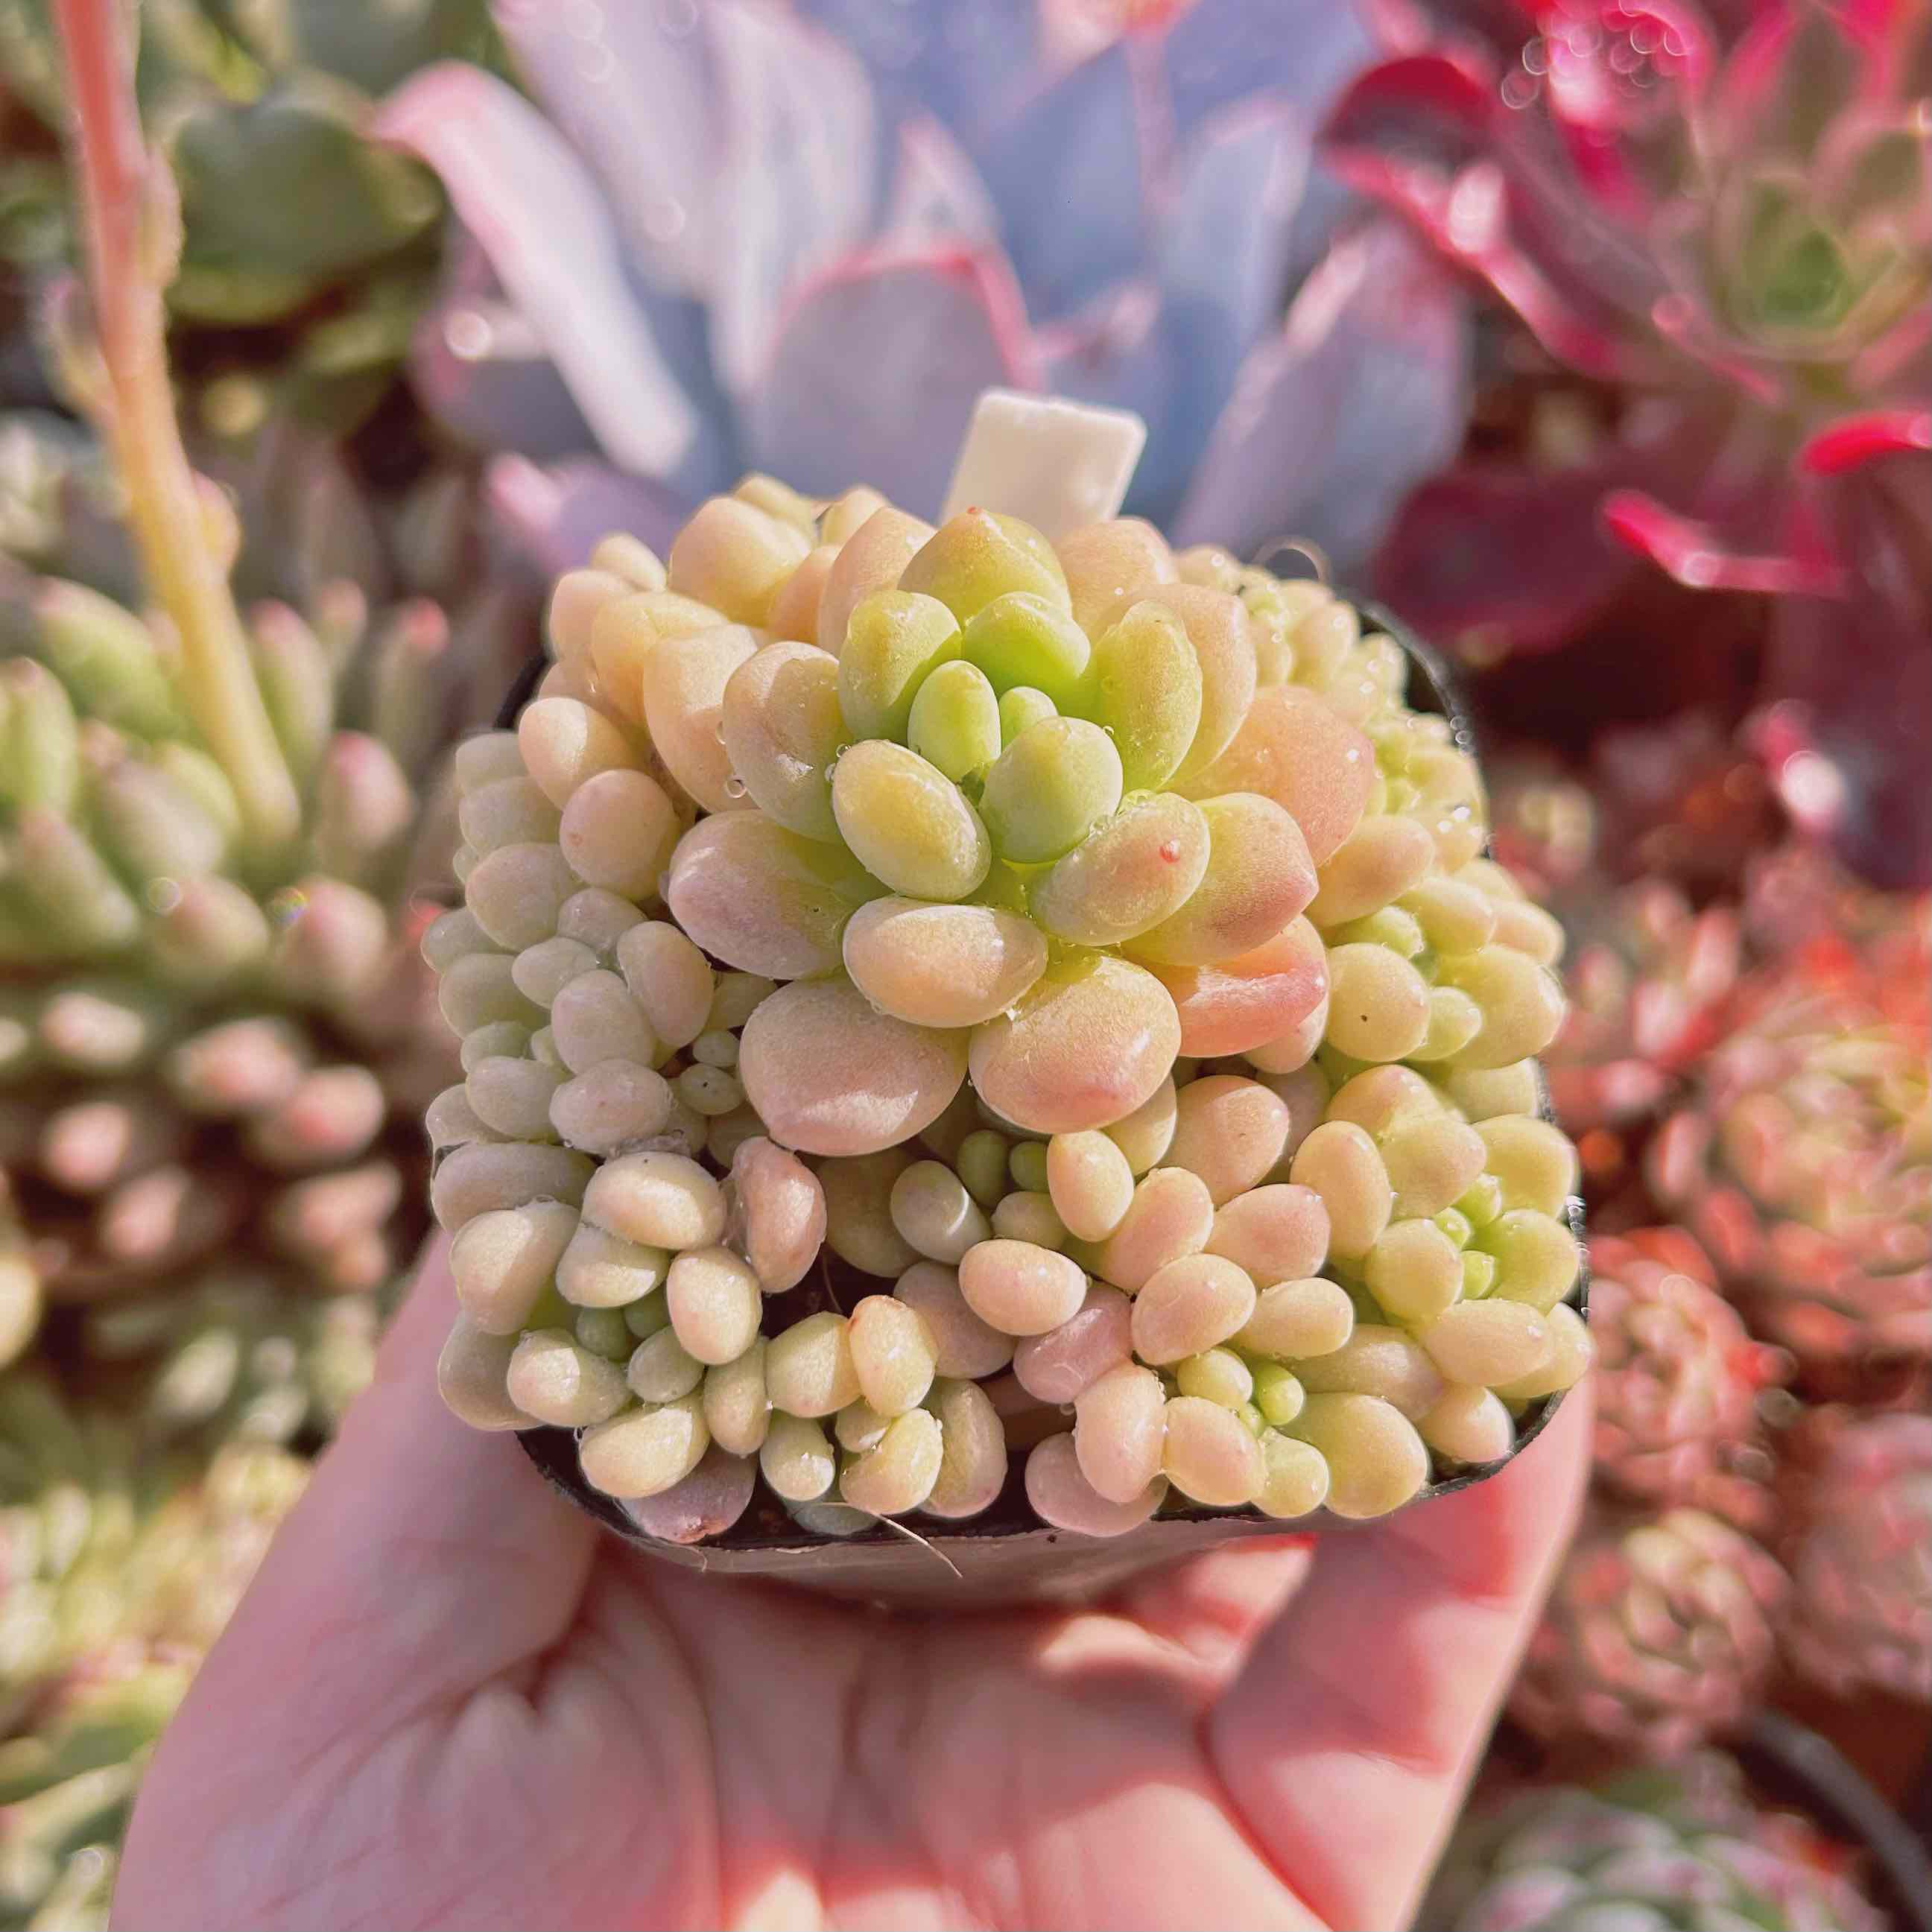  succulent plant caviar 10 head and more .. agriculture .